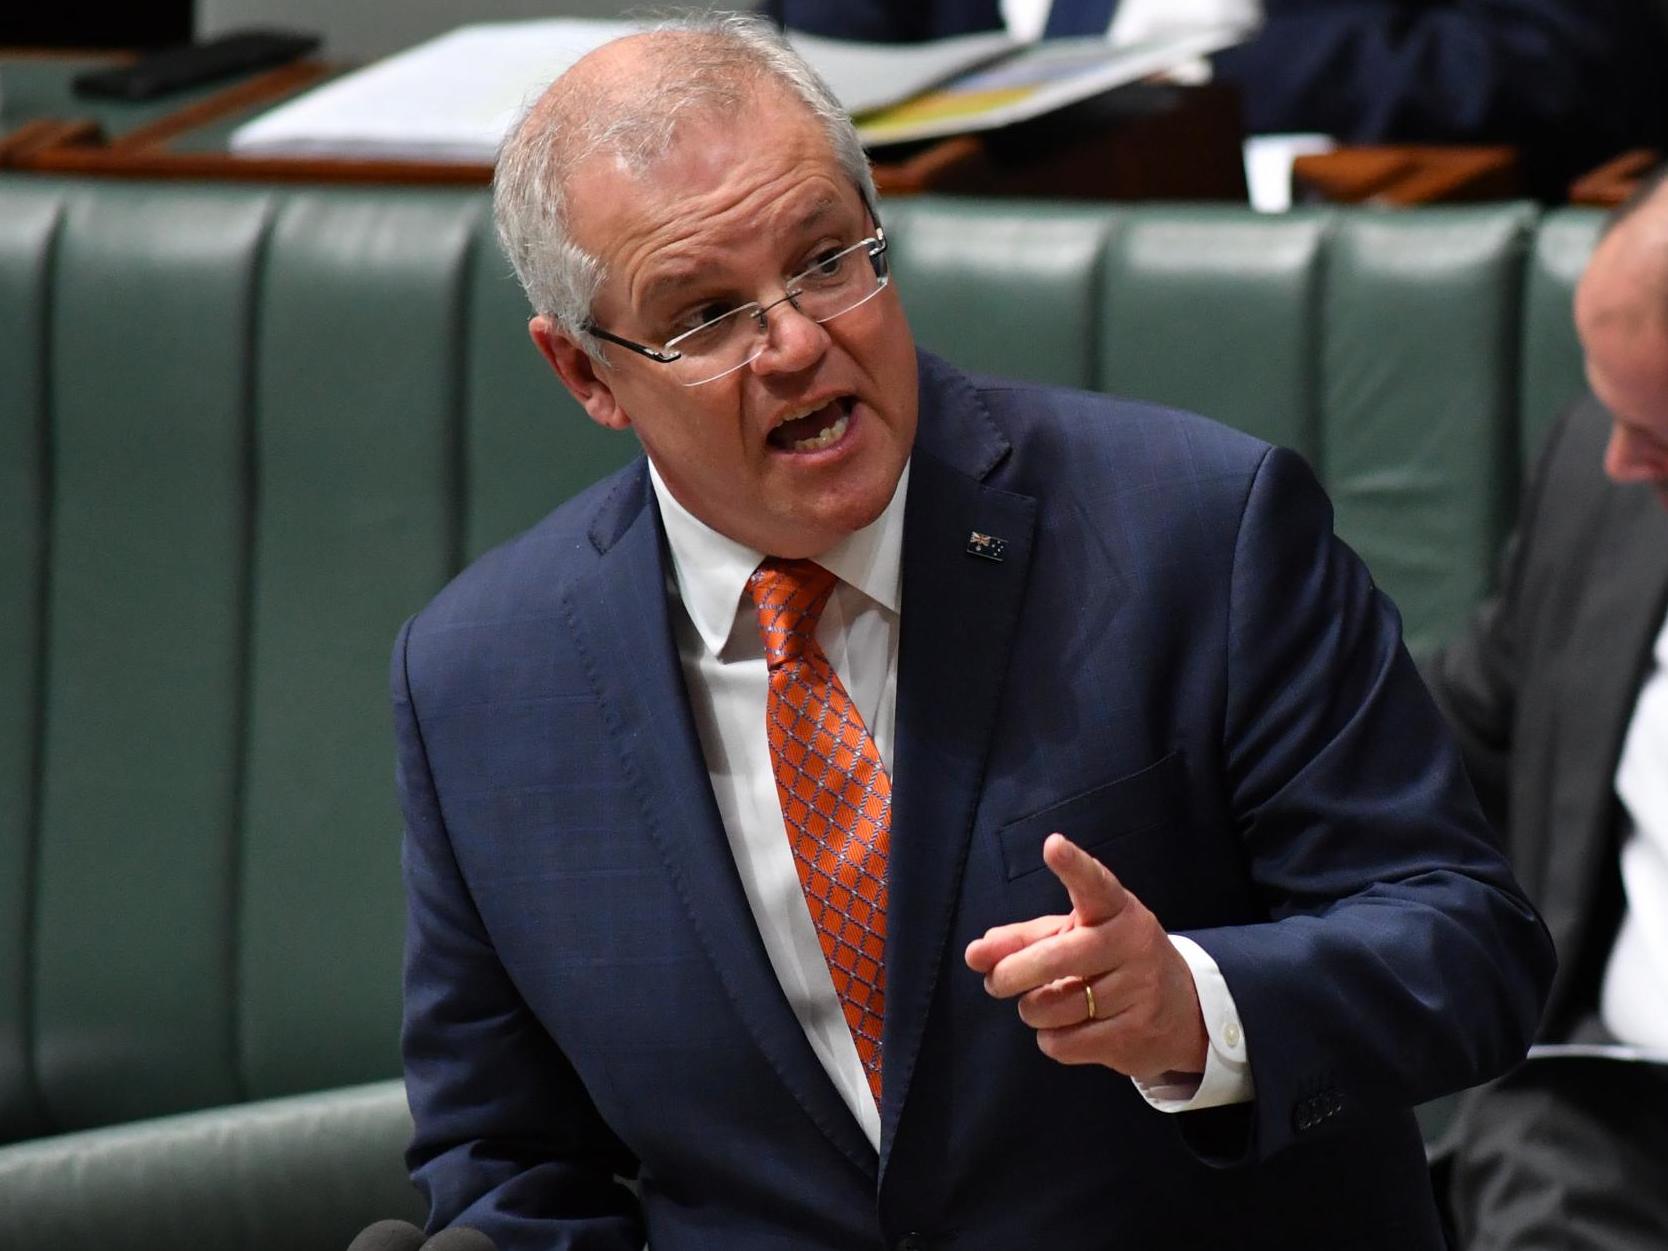 Outcry after Scott Morrison says 'there was no slavery in Australia' amid Black Lives Matter protests